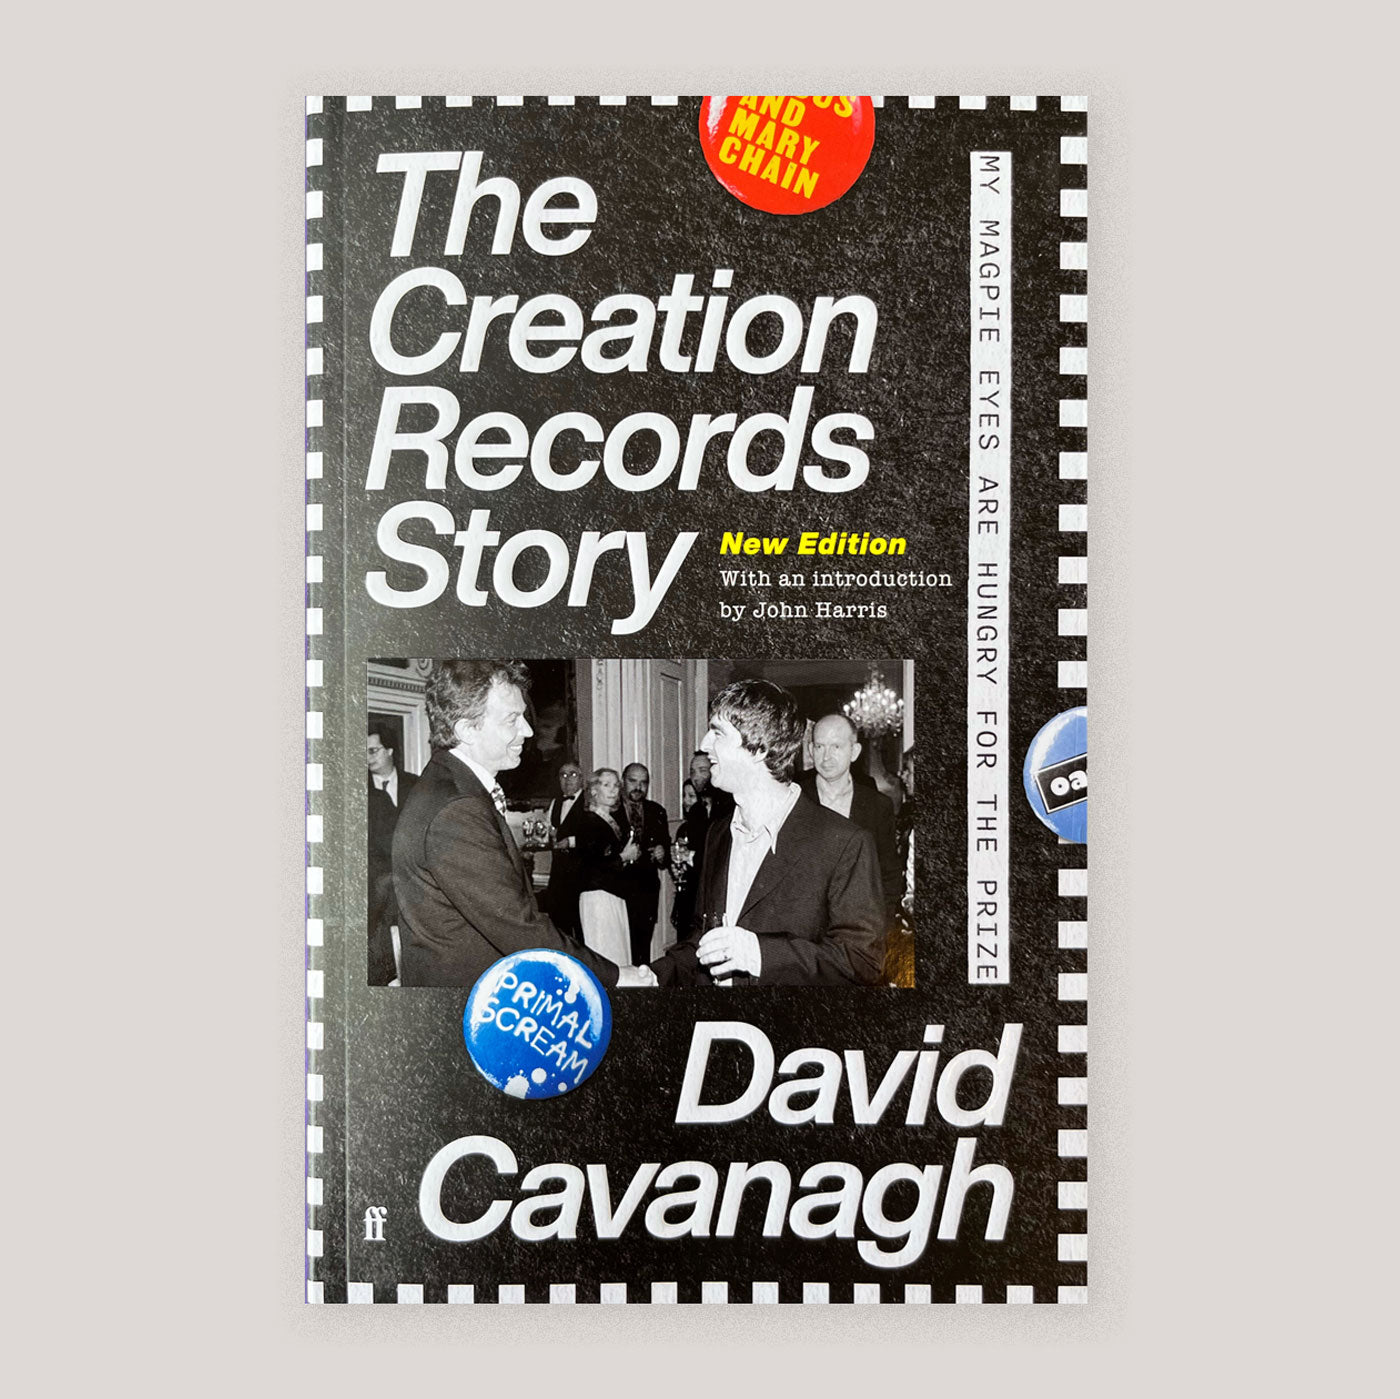 The Creation Records Story | David Cavanagh | Colours May Vary 